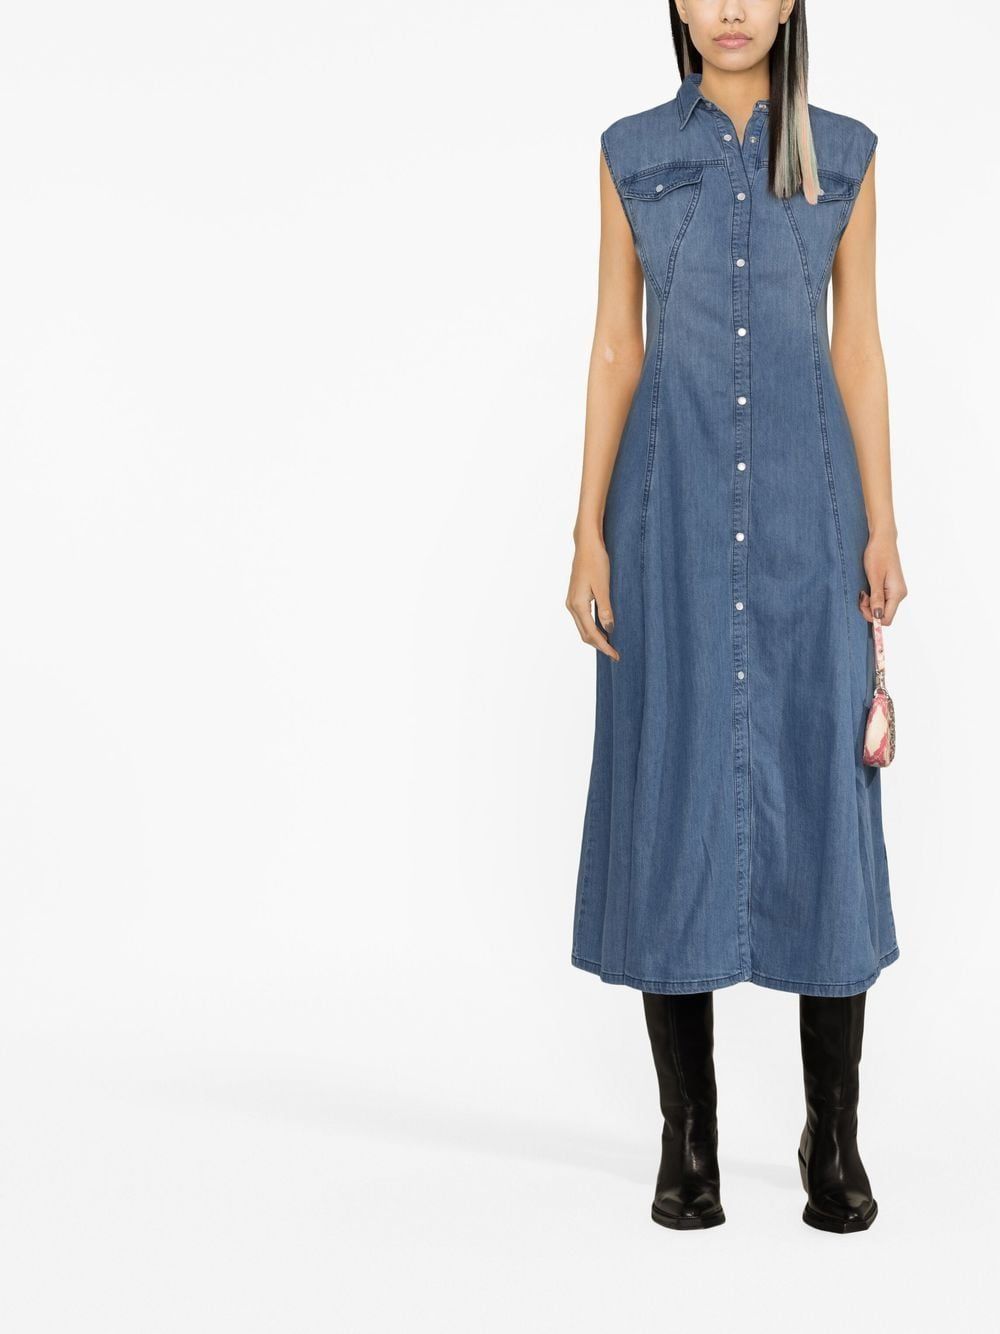 Mix
The Styles With Denim Shirt Dress